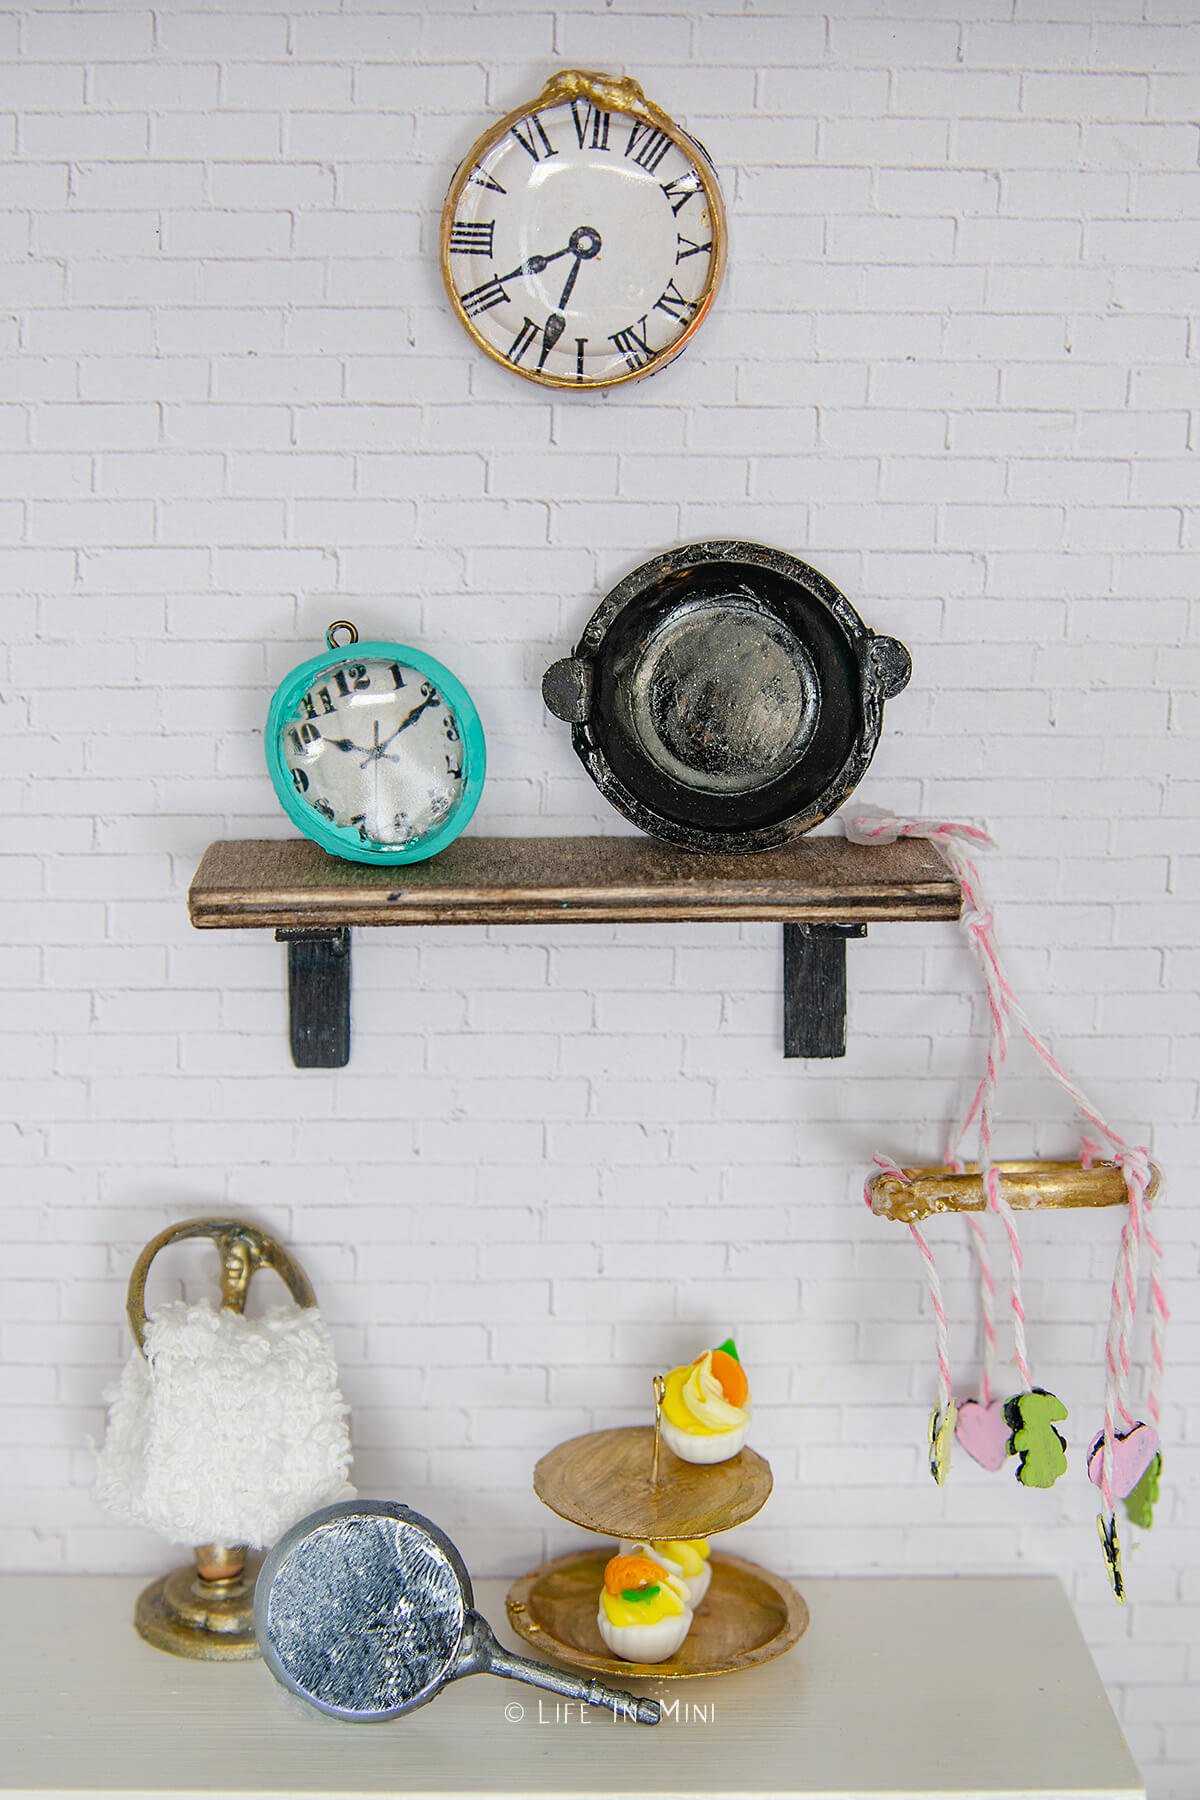 Miniature antique clocks, cast iron pan, towel ring, hand mirror, tiered tray and mobile all made with plastic pull tabs